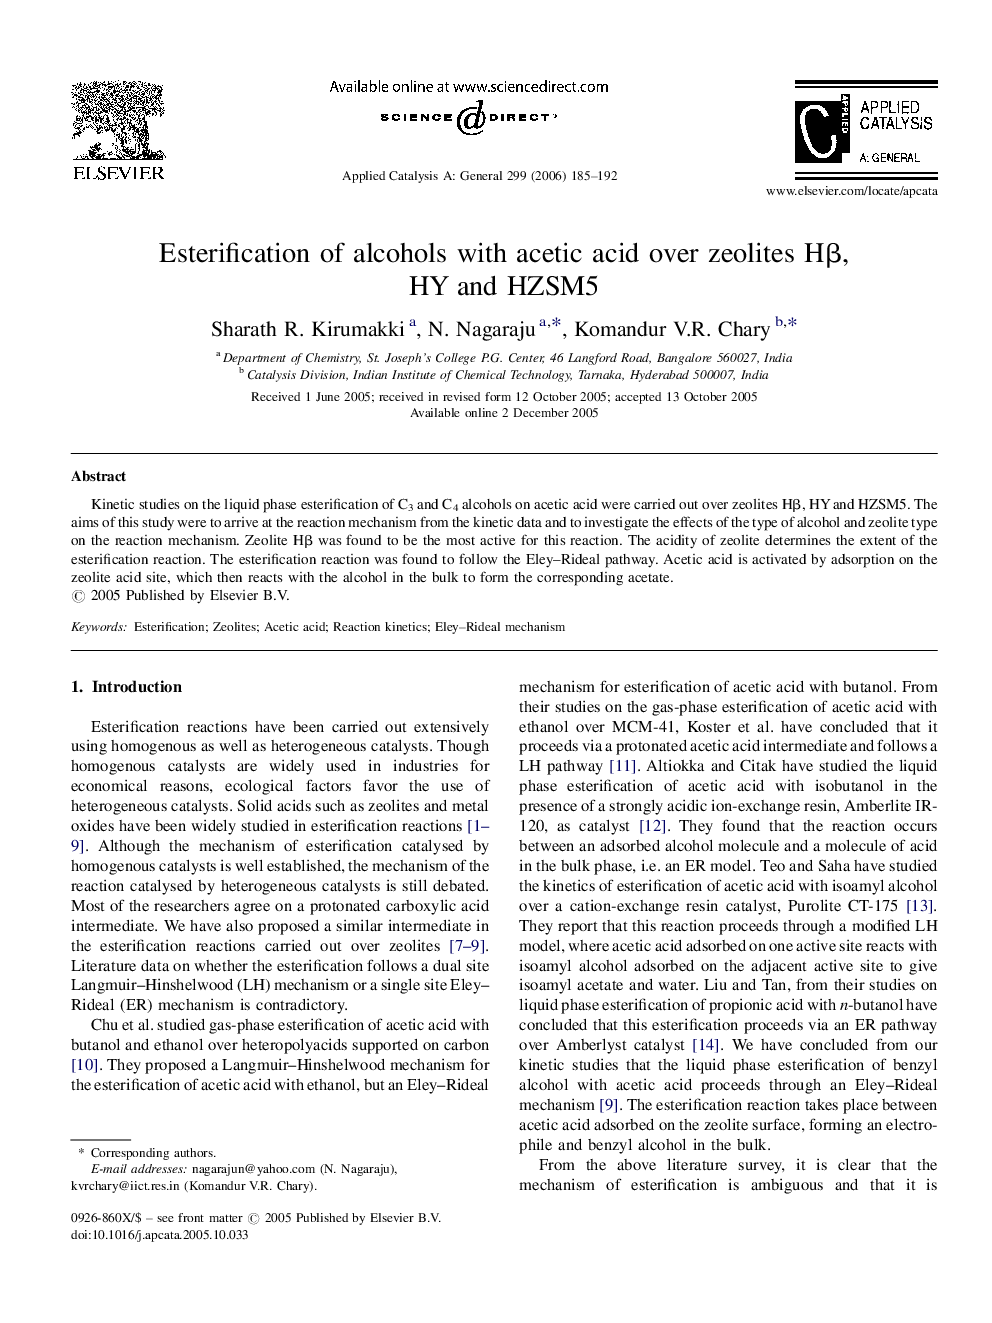 Esterification of alcohols with acetic acid over zeolites Hβ, HY and HZSM5